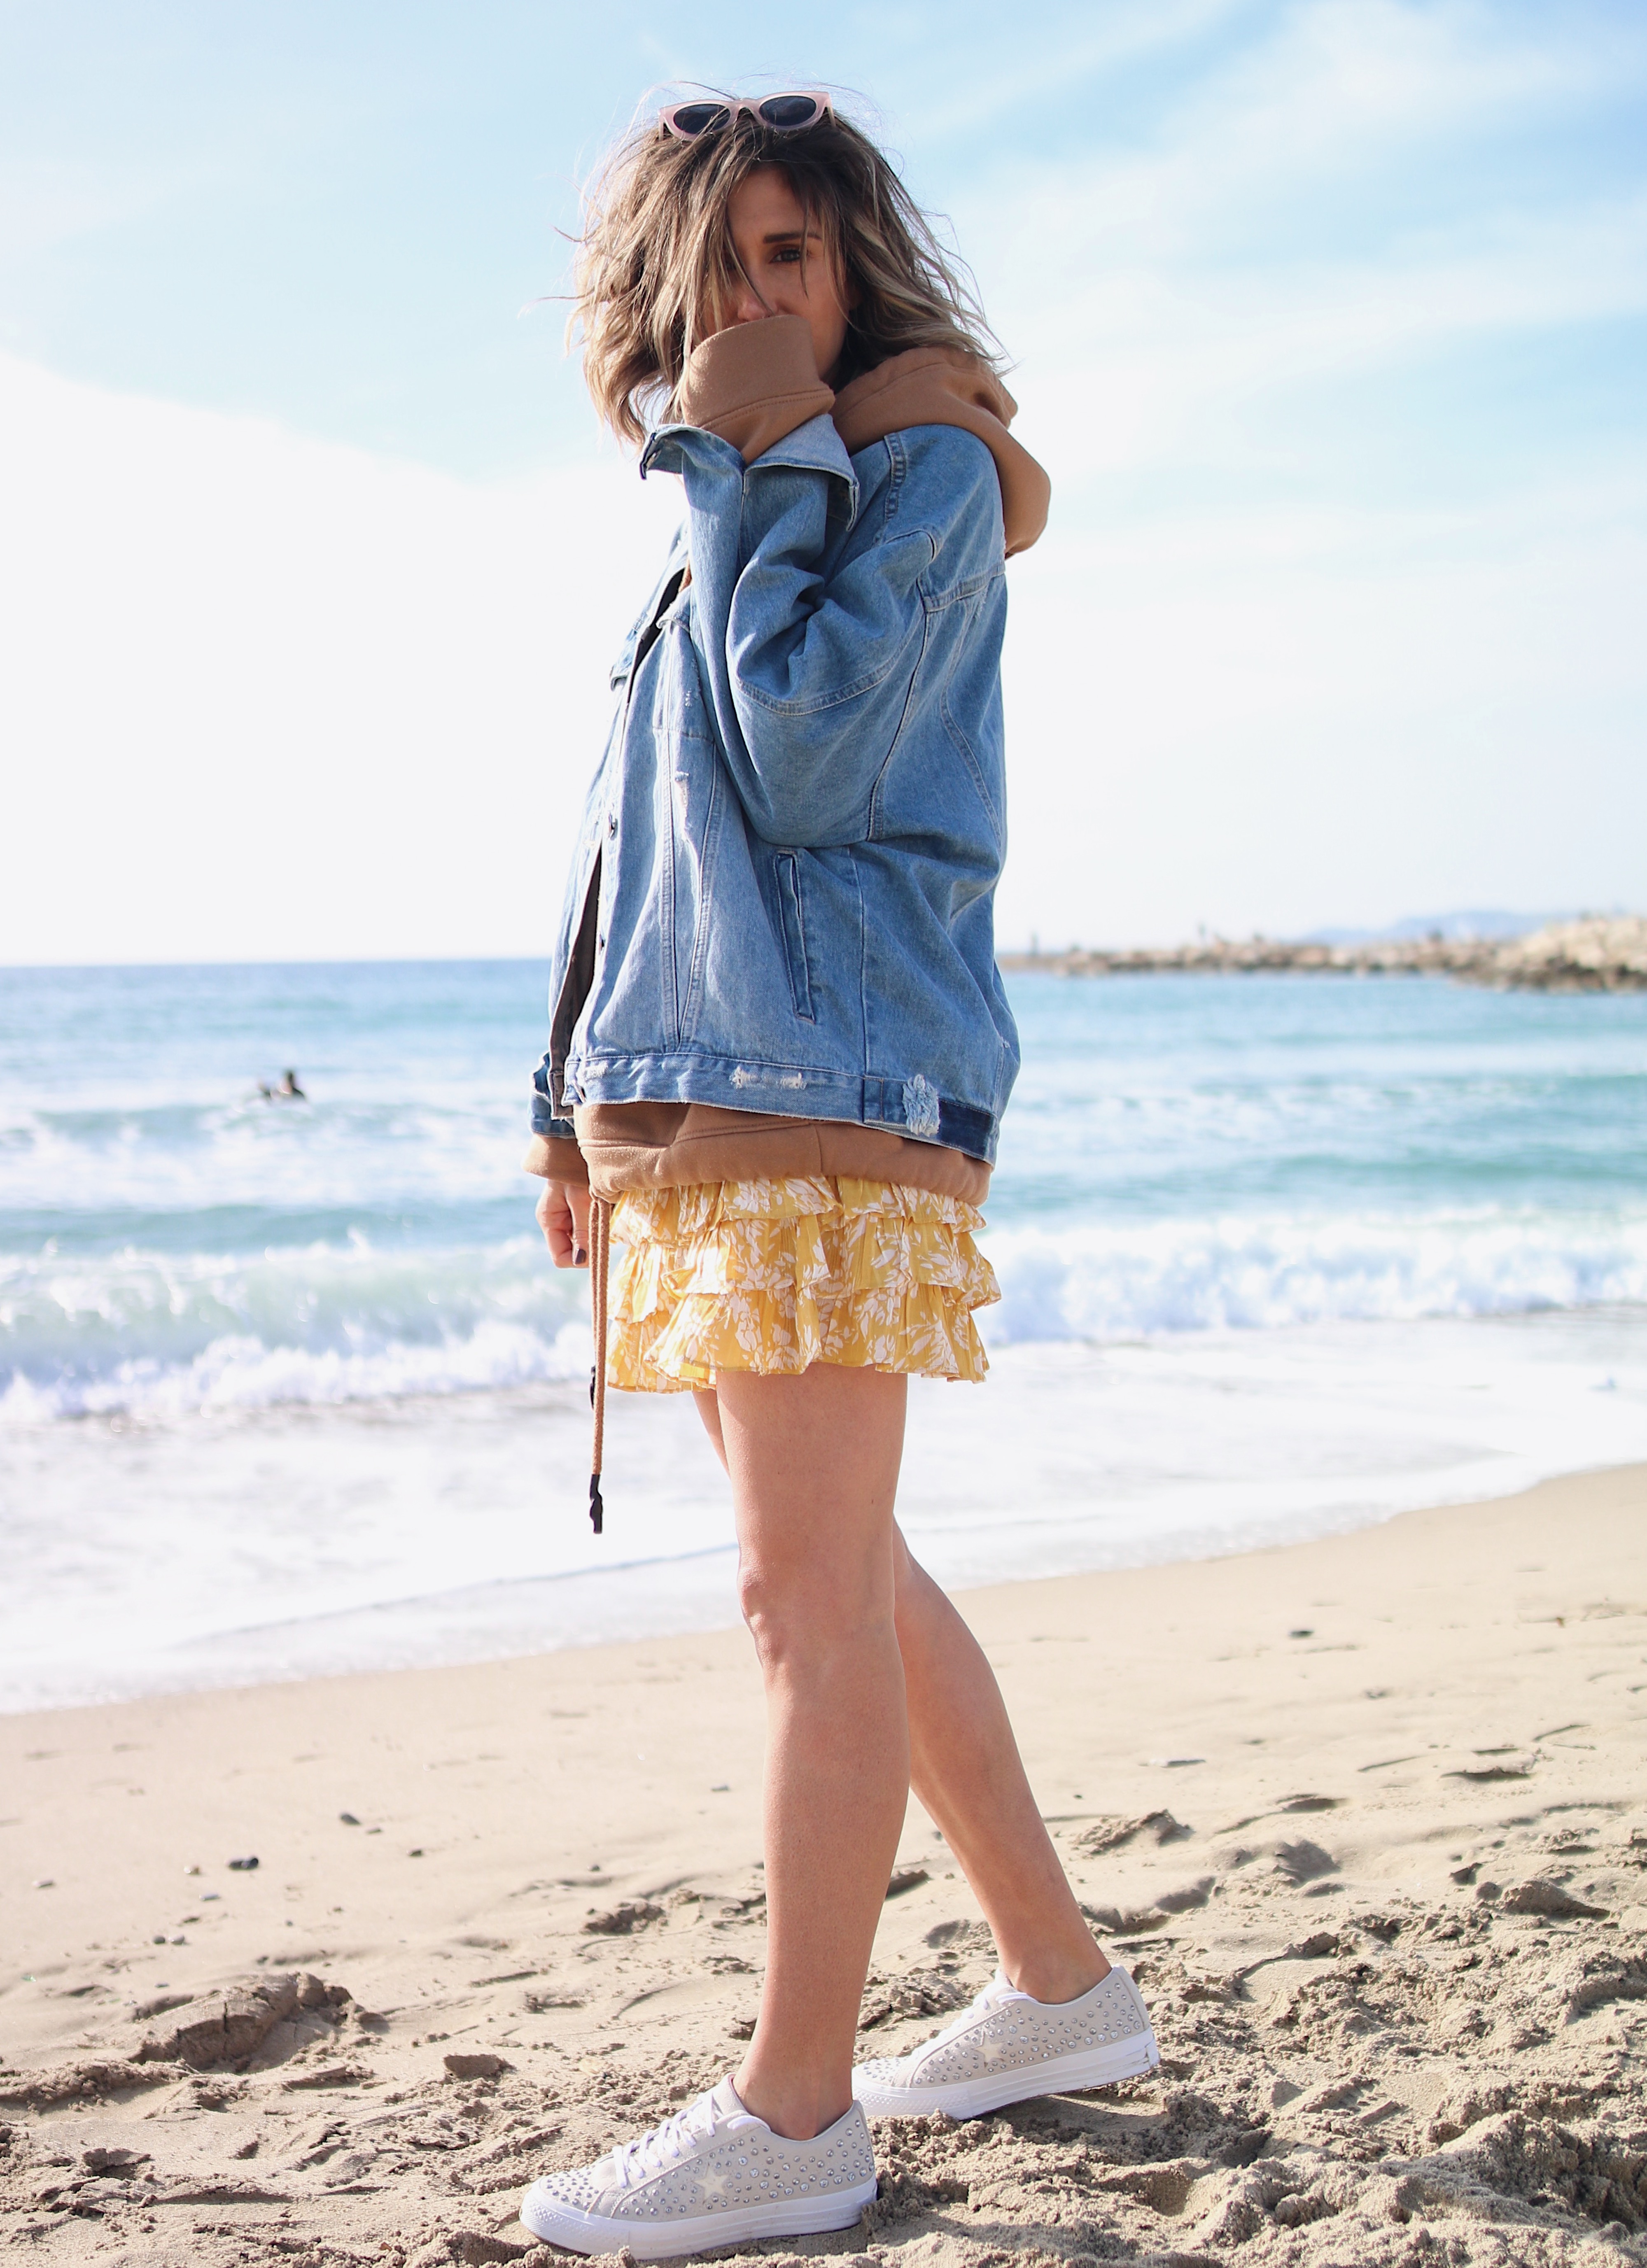 MINI MINI - Chon & CHON -mini skirt from Tularosa, casual style, outfit inspiration, sweater lover, beach outfit, mini jupe et gros sweat, hoodie style